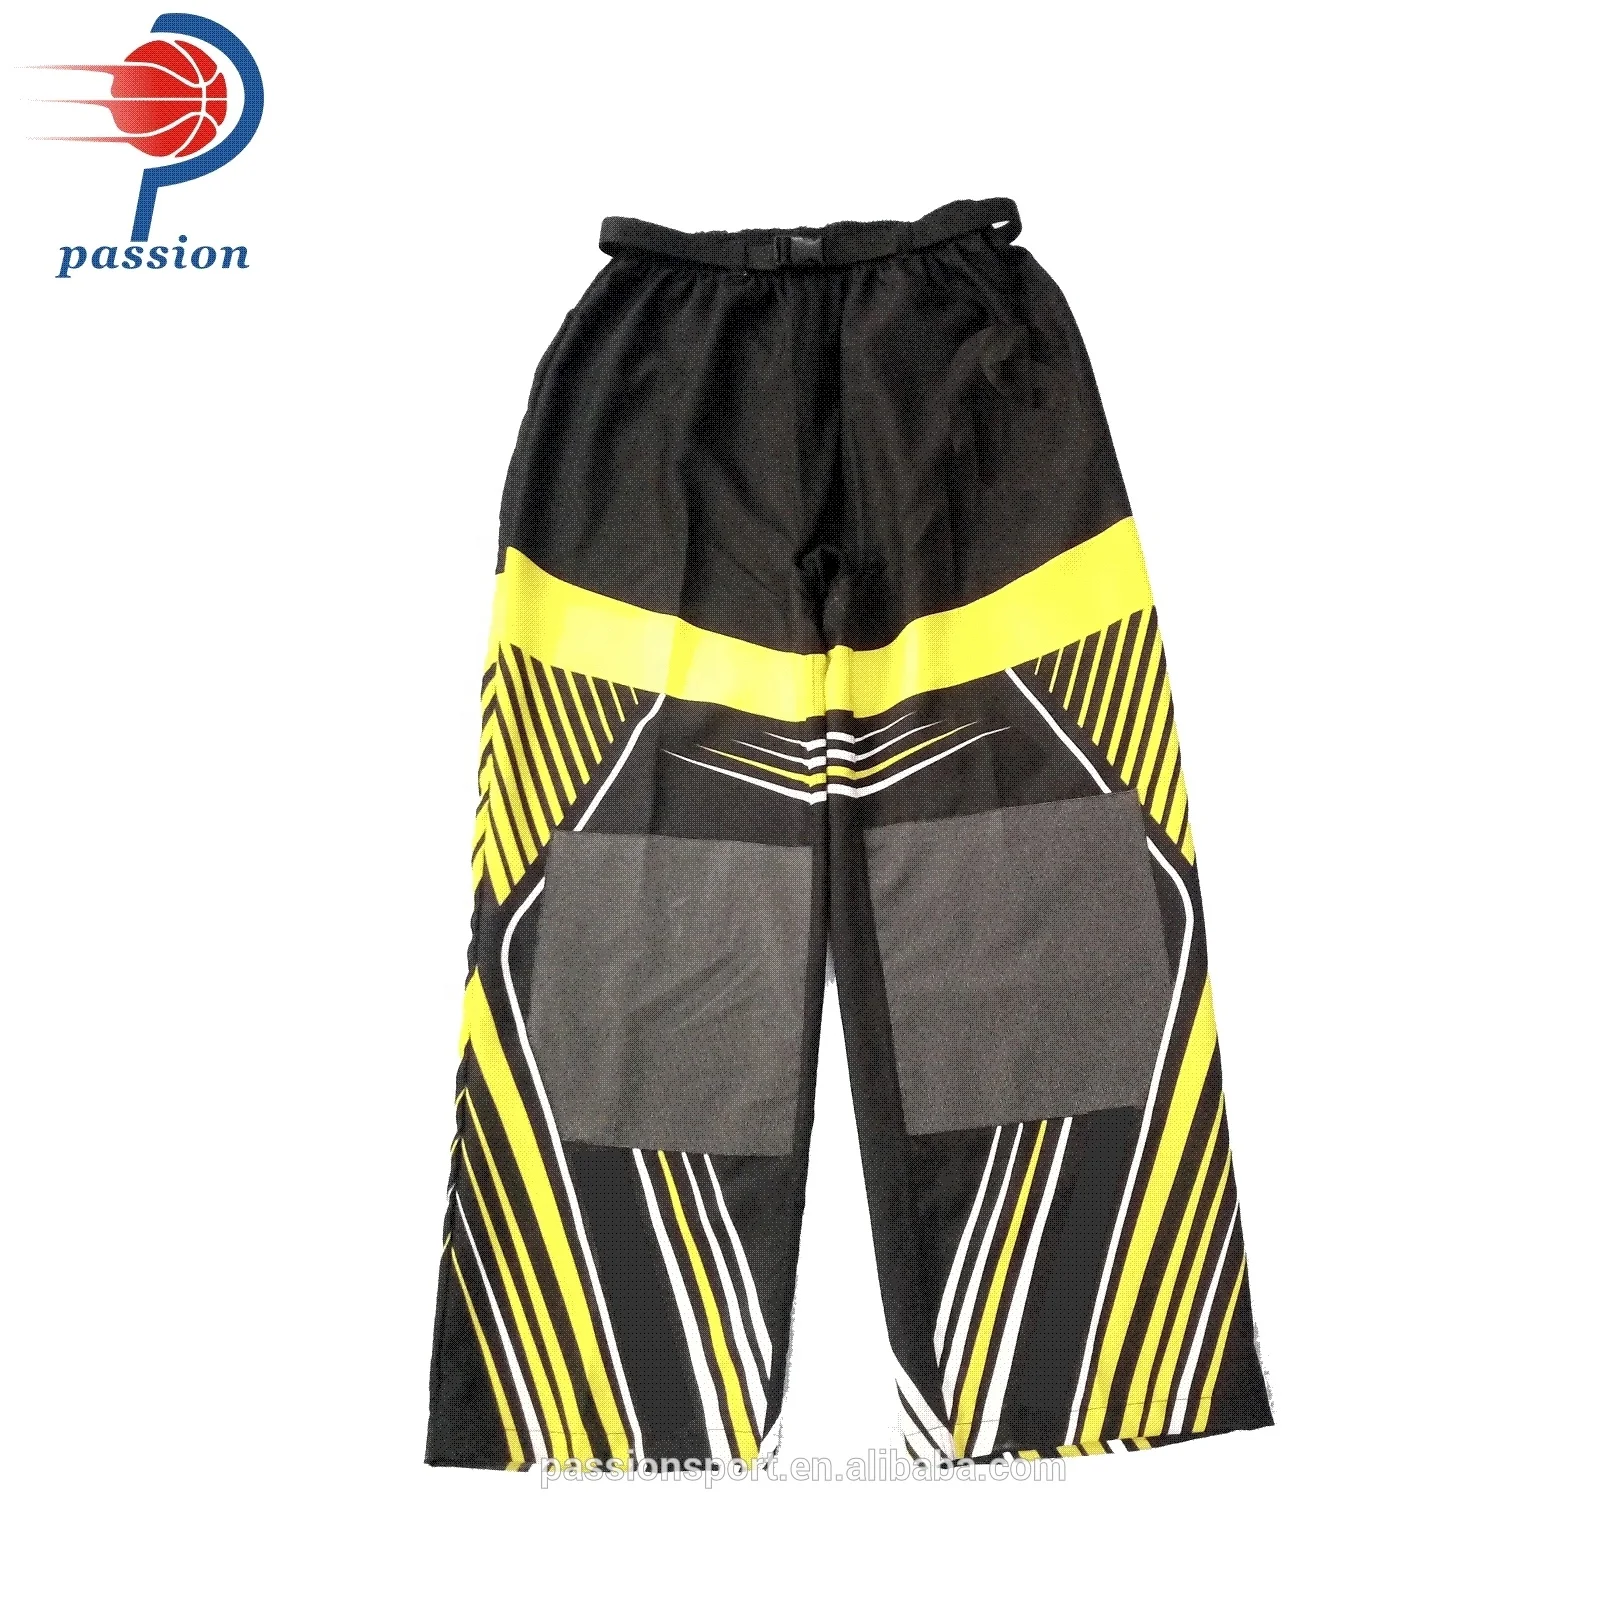 Download New Design Sublimated Roller Hockey Pants - Buy Hockey ...